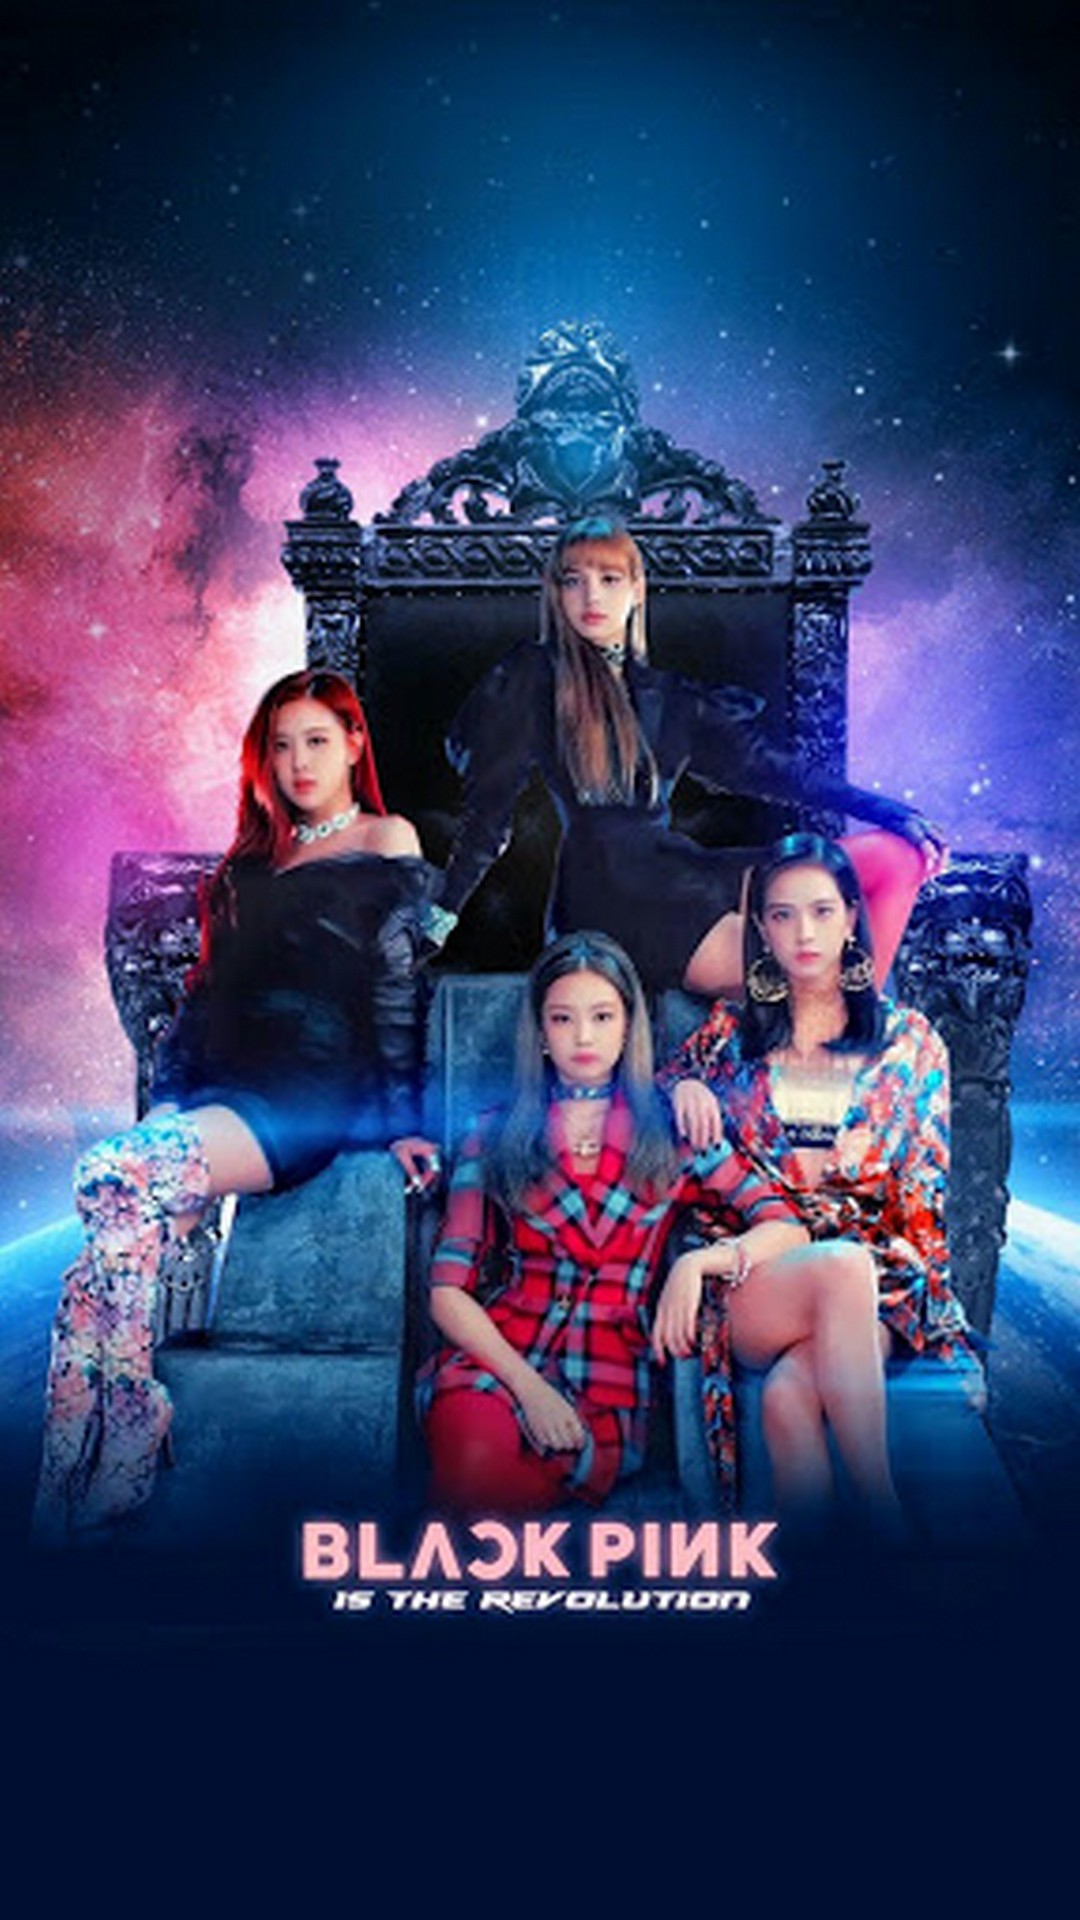 Blackpink Wallpaper iPhone with high-resolution 1080x1920 pixel. You can use this wallpaper for your iPhone 5, 6, 7, 8, X, XS, XR backgrounds, Mobile Screensaver, or iPad Lock Screen